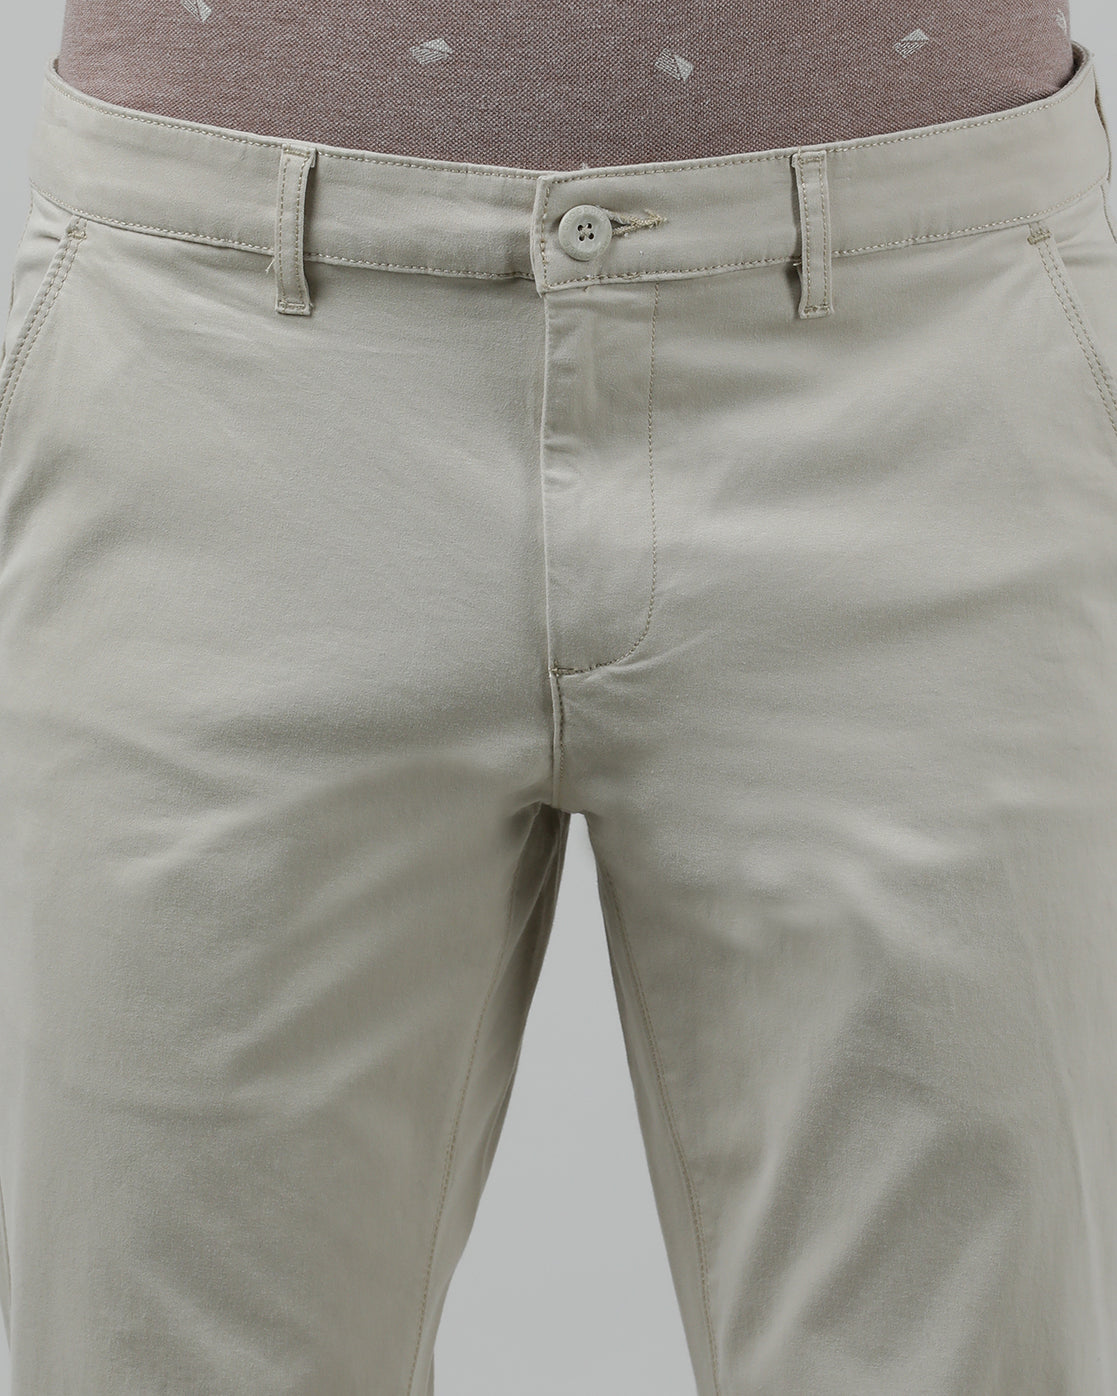 Casual Slim Fit Solid Beige Trousers for Men